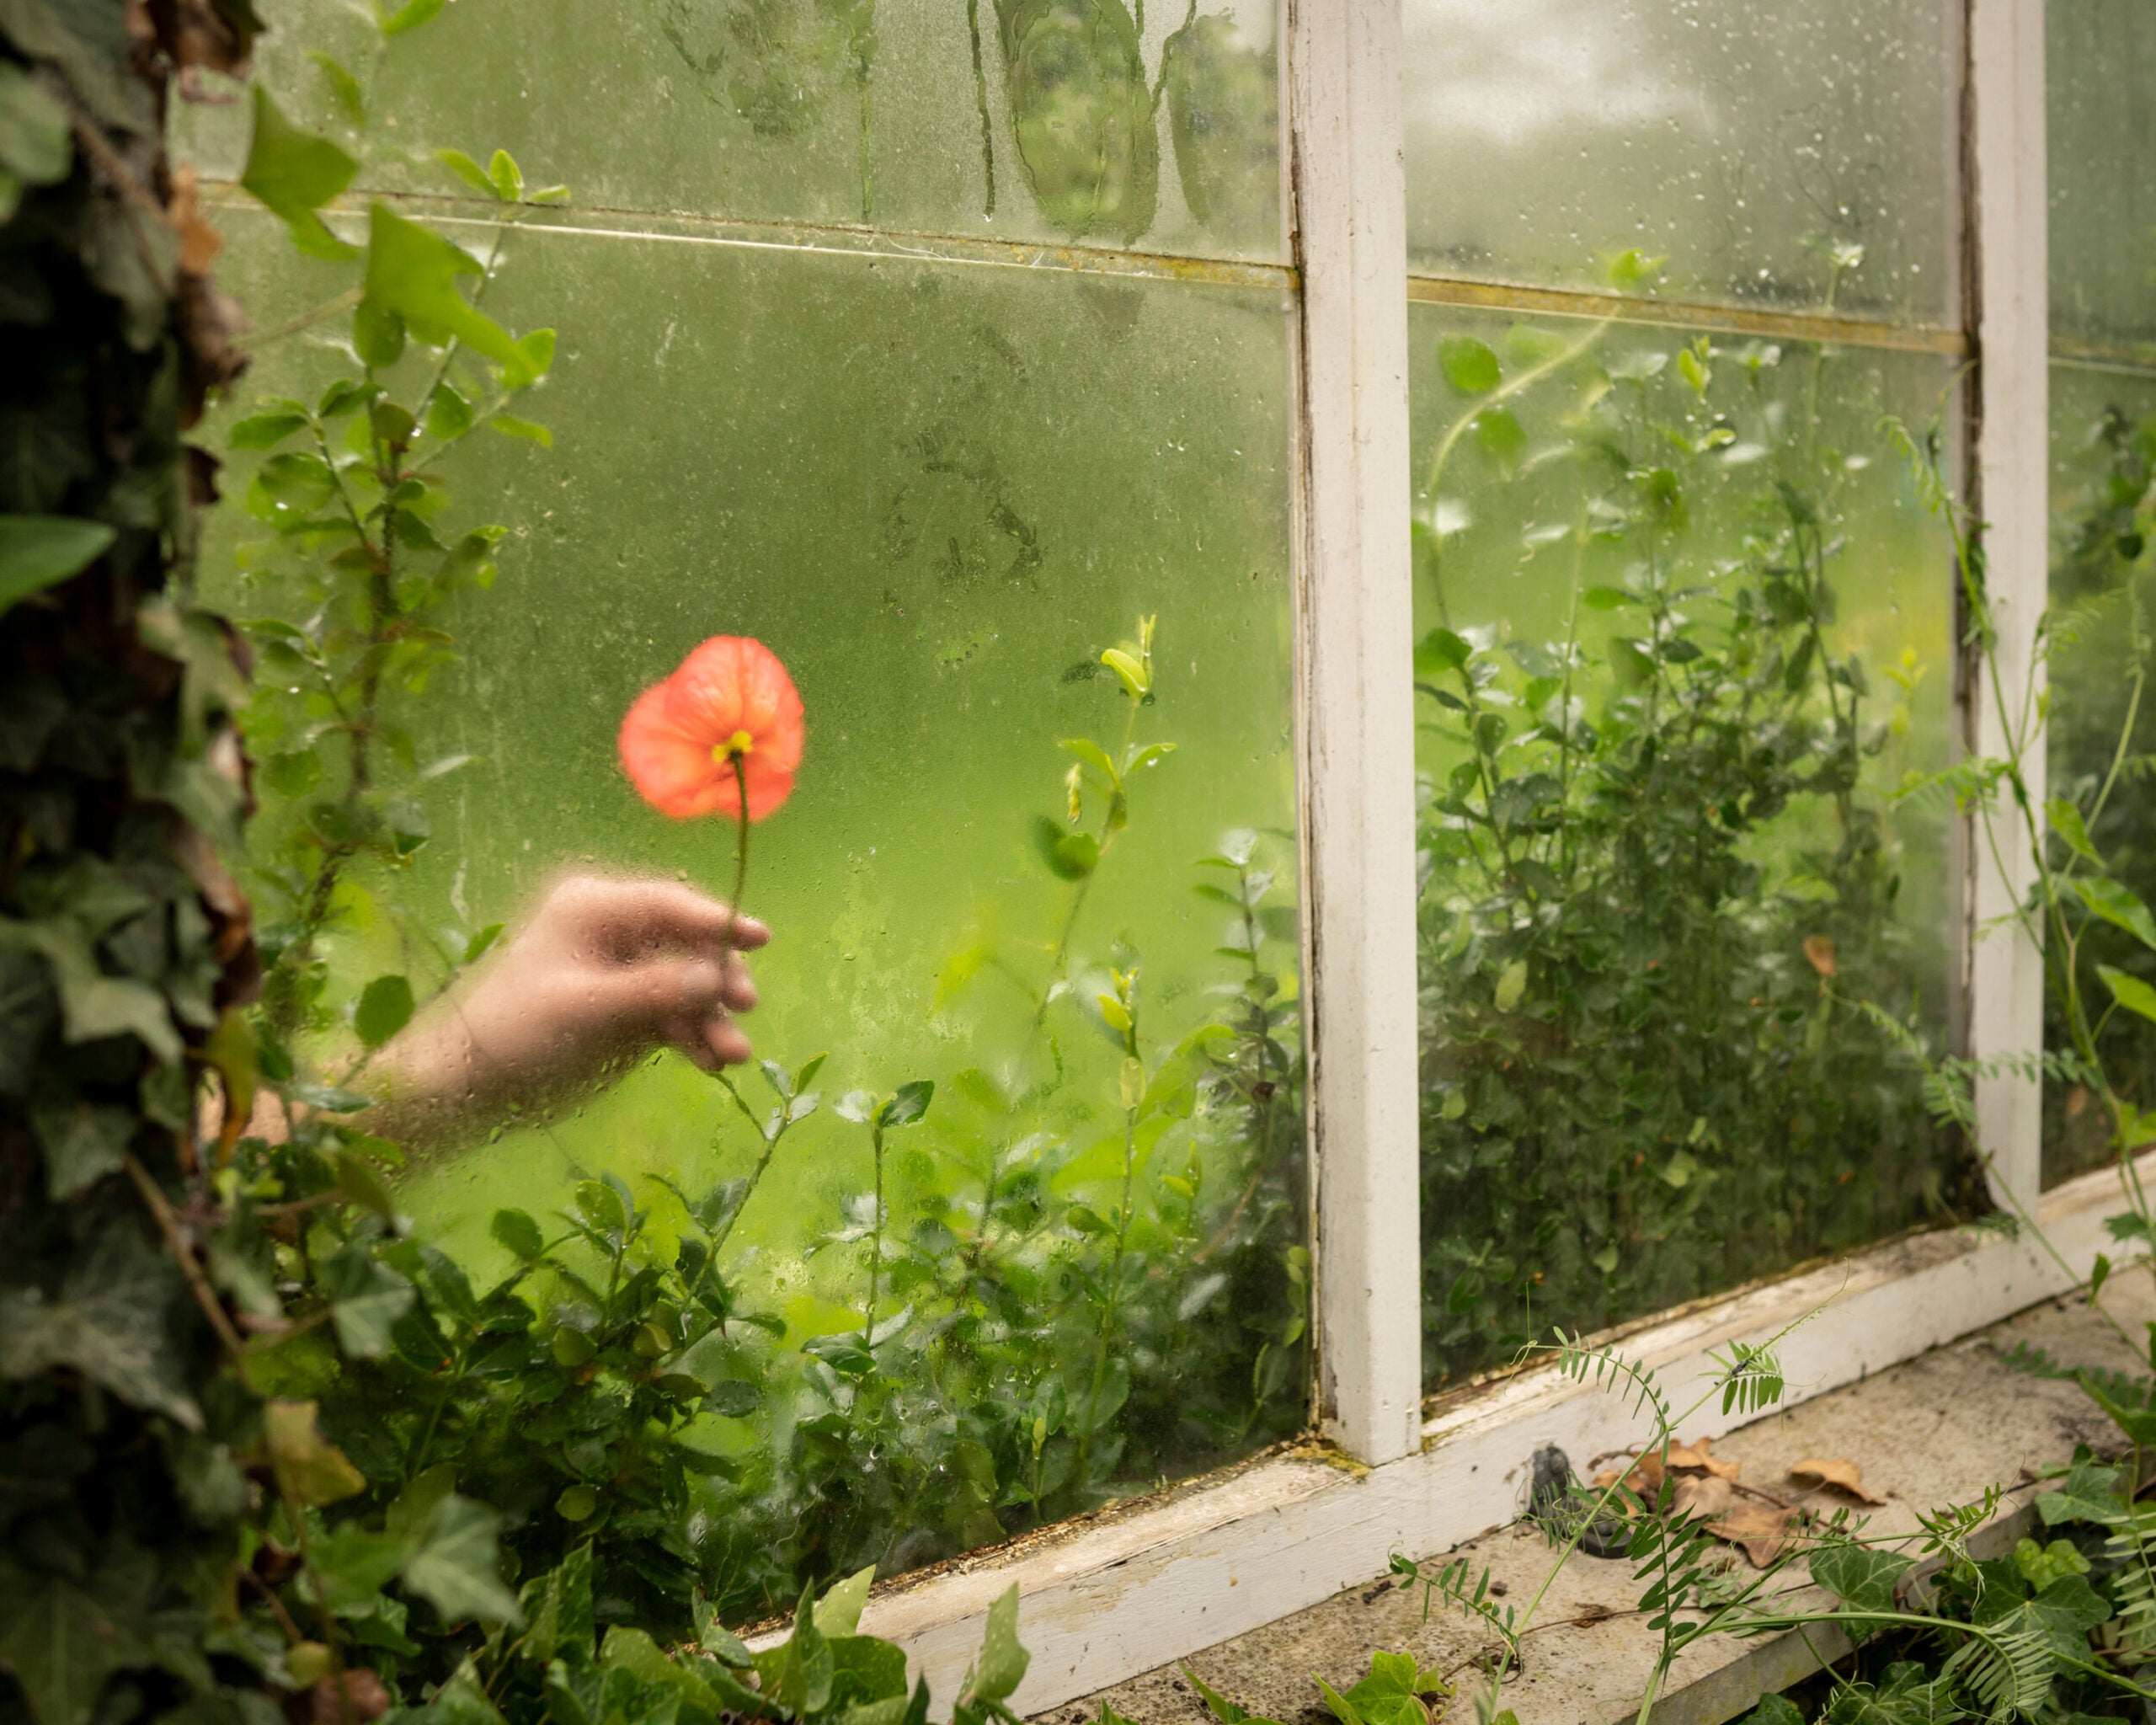 The Poppy and Greenhouse by Cig Harvey.